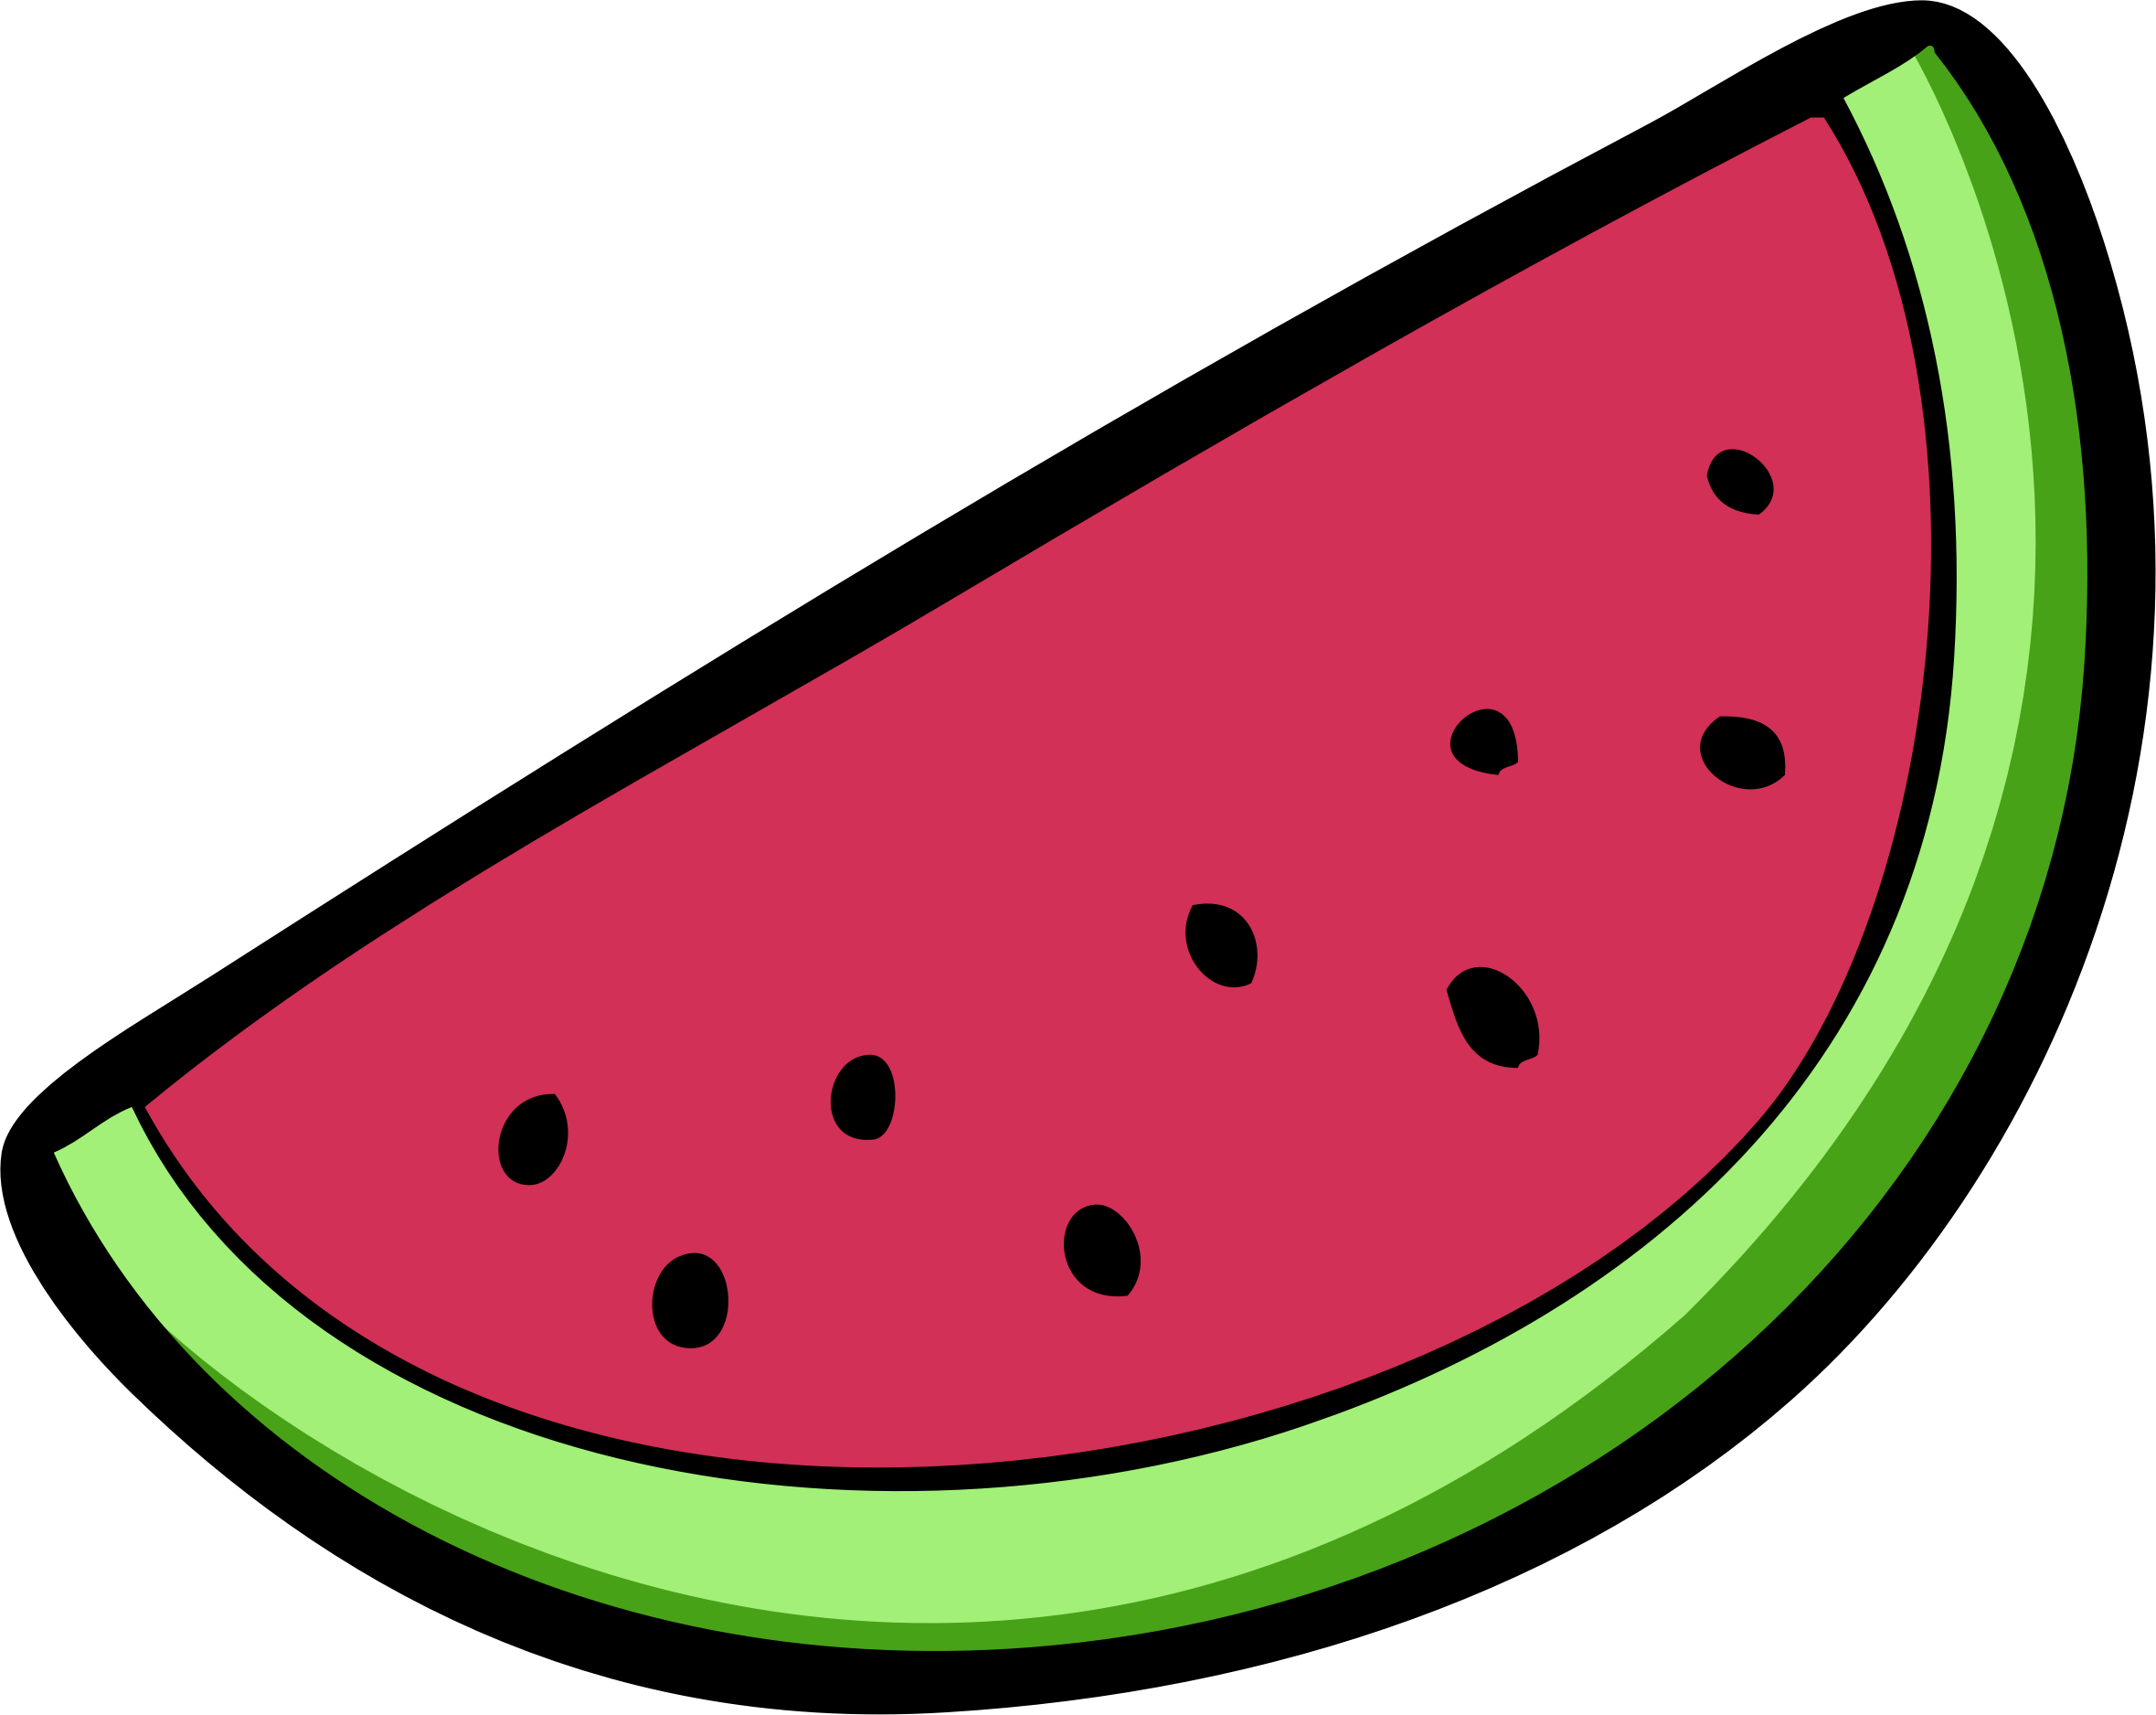 Watermelon clipart small watermelon. Big image png